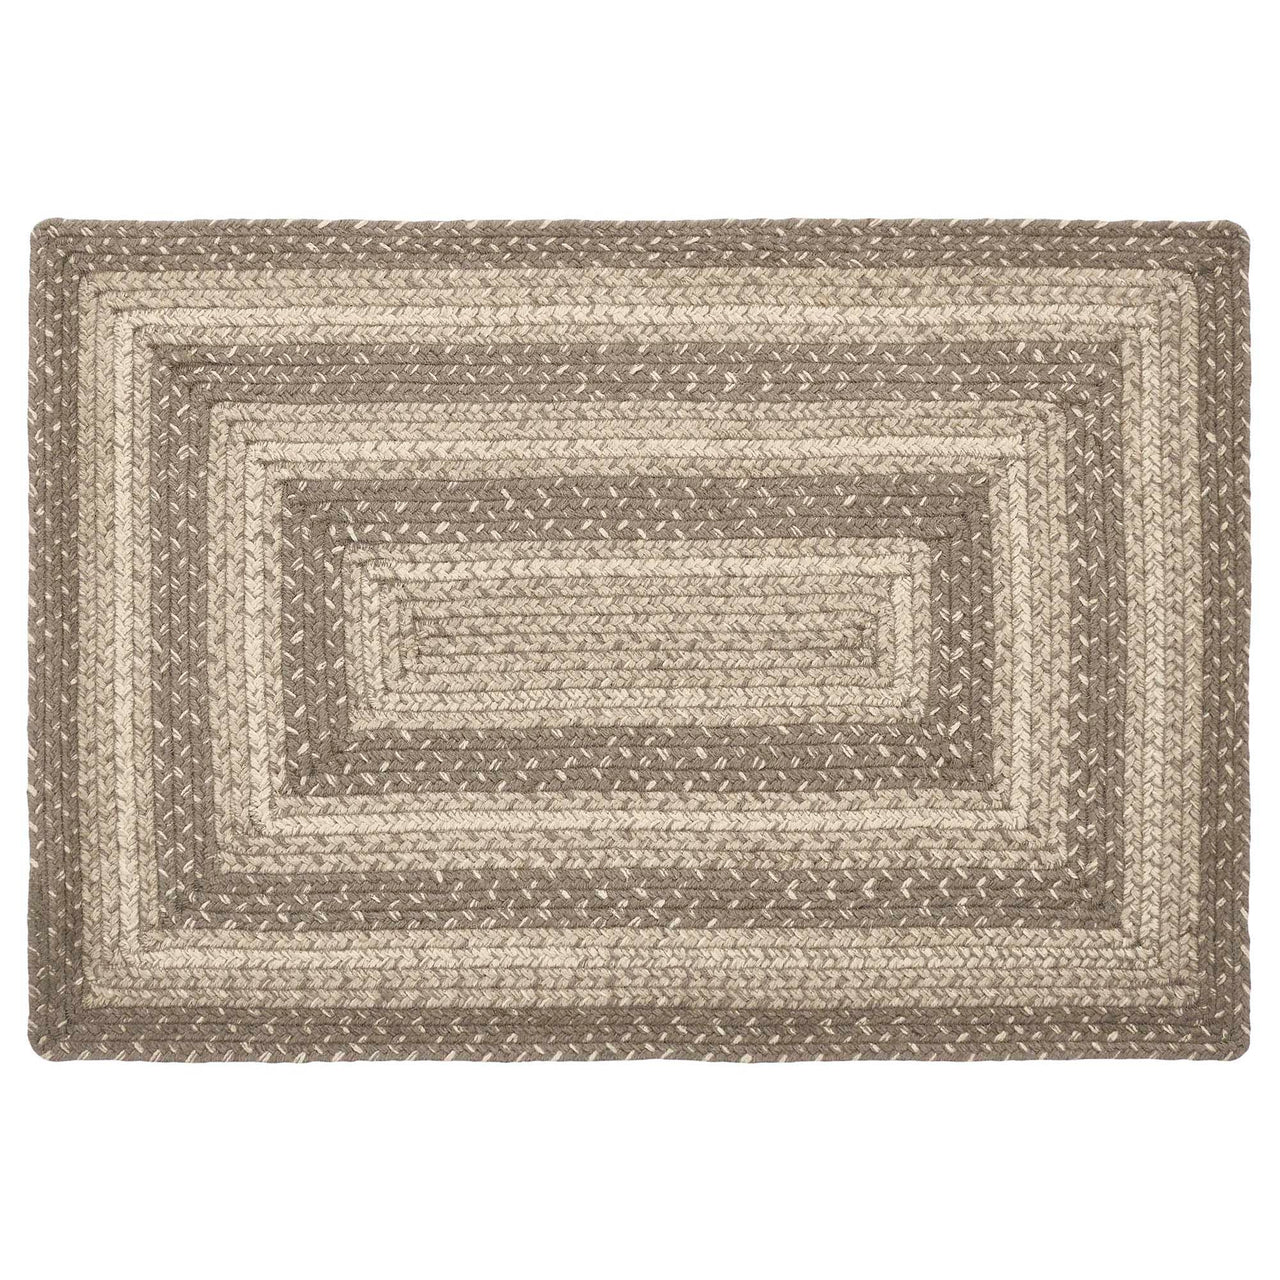 Cobblestone Jute Braided Rug Rect with Rug Pad 20"x30" VHC Brands